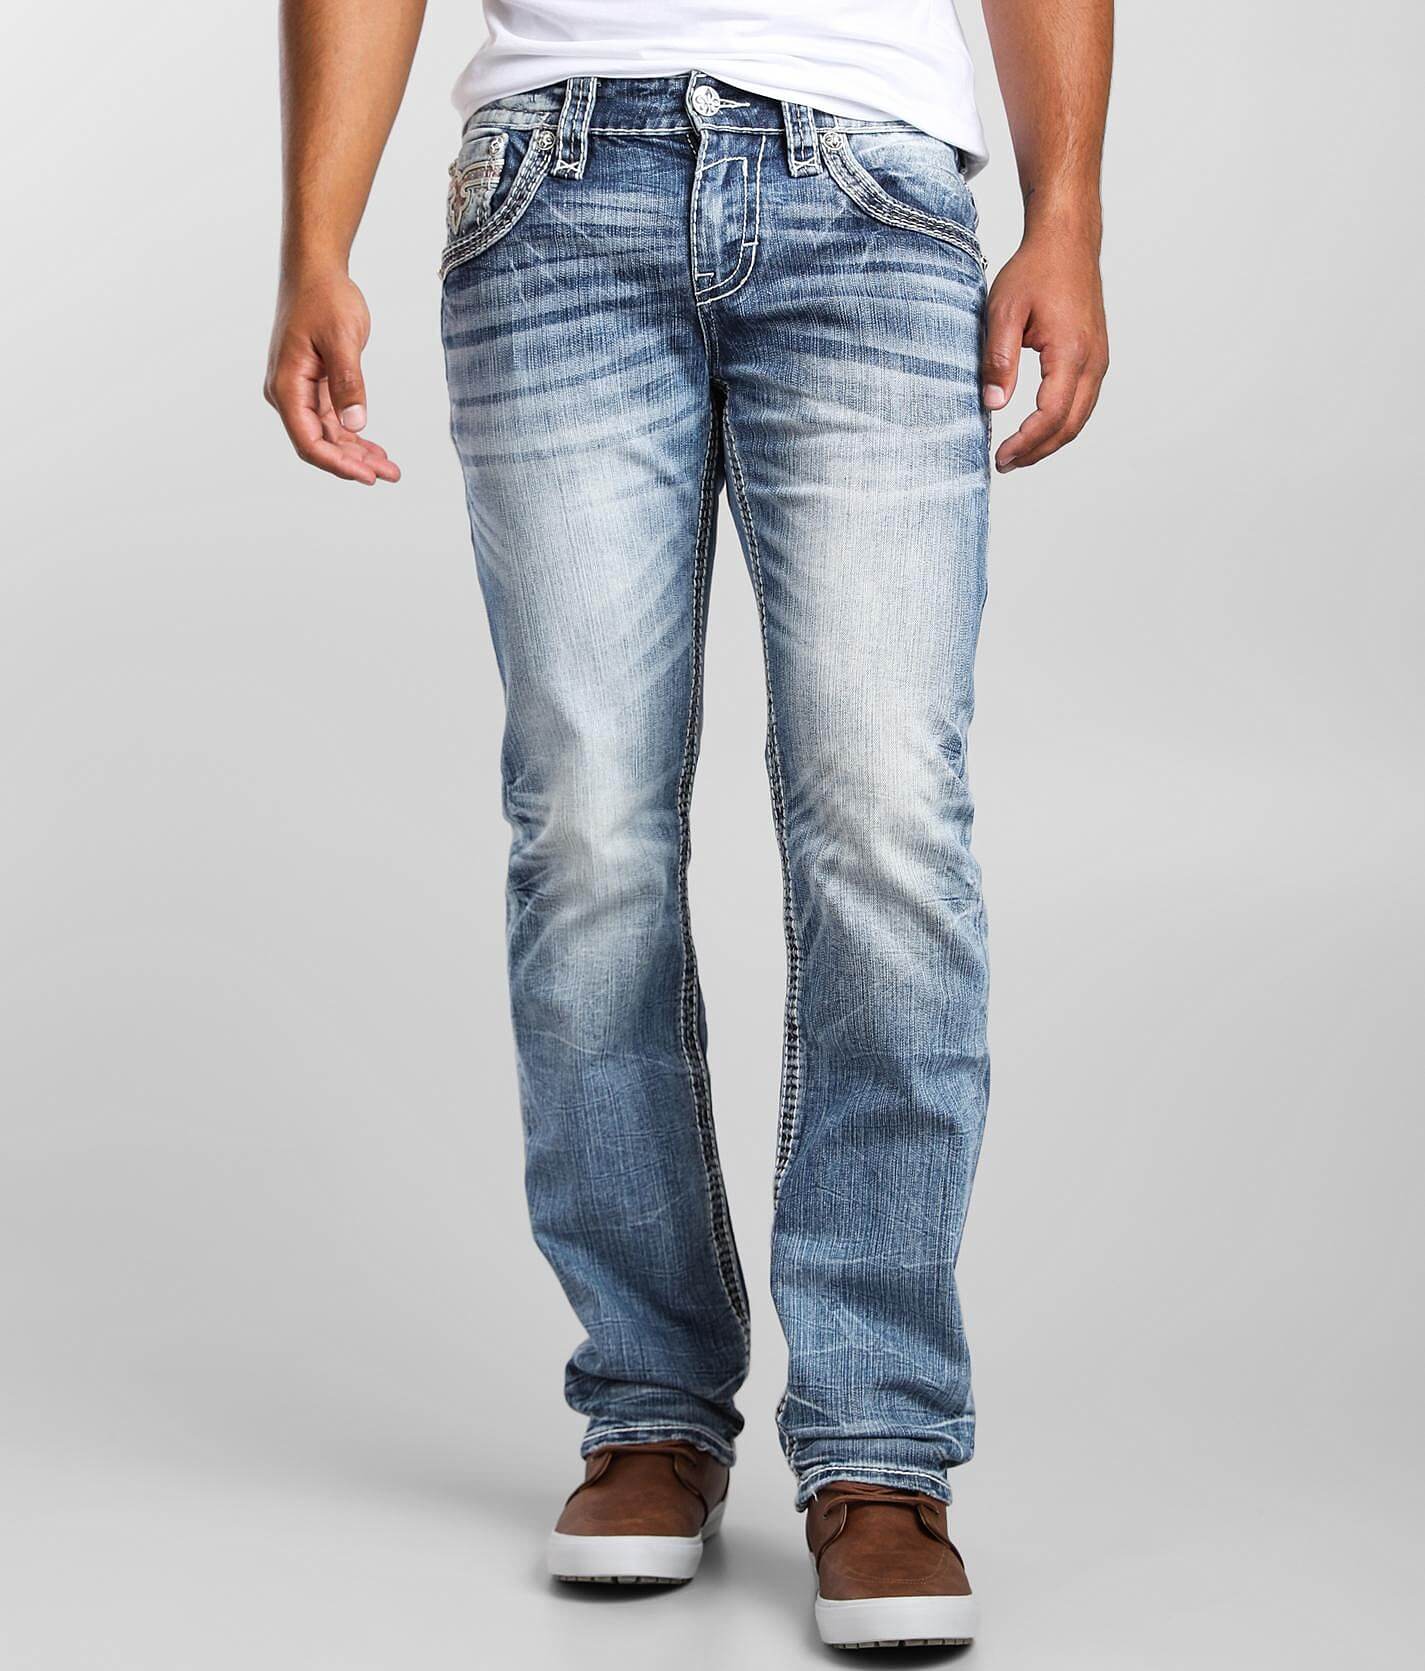 rock and roll revival jeans